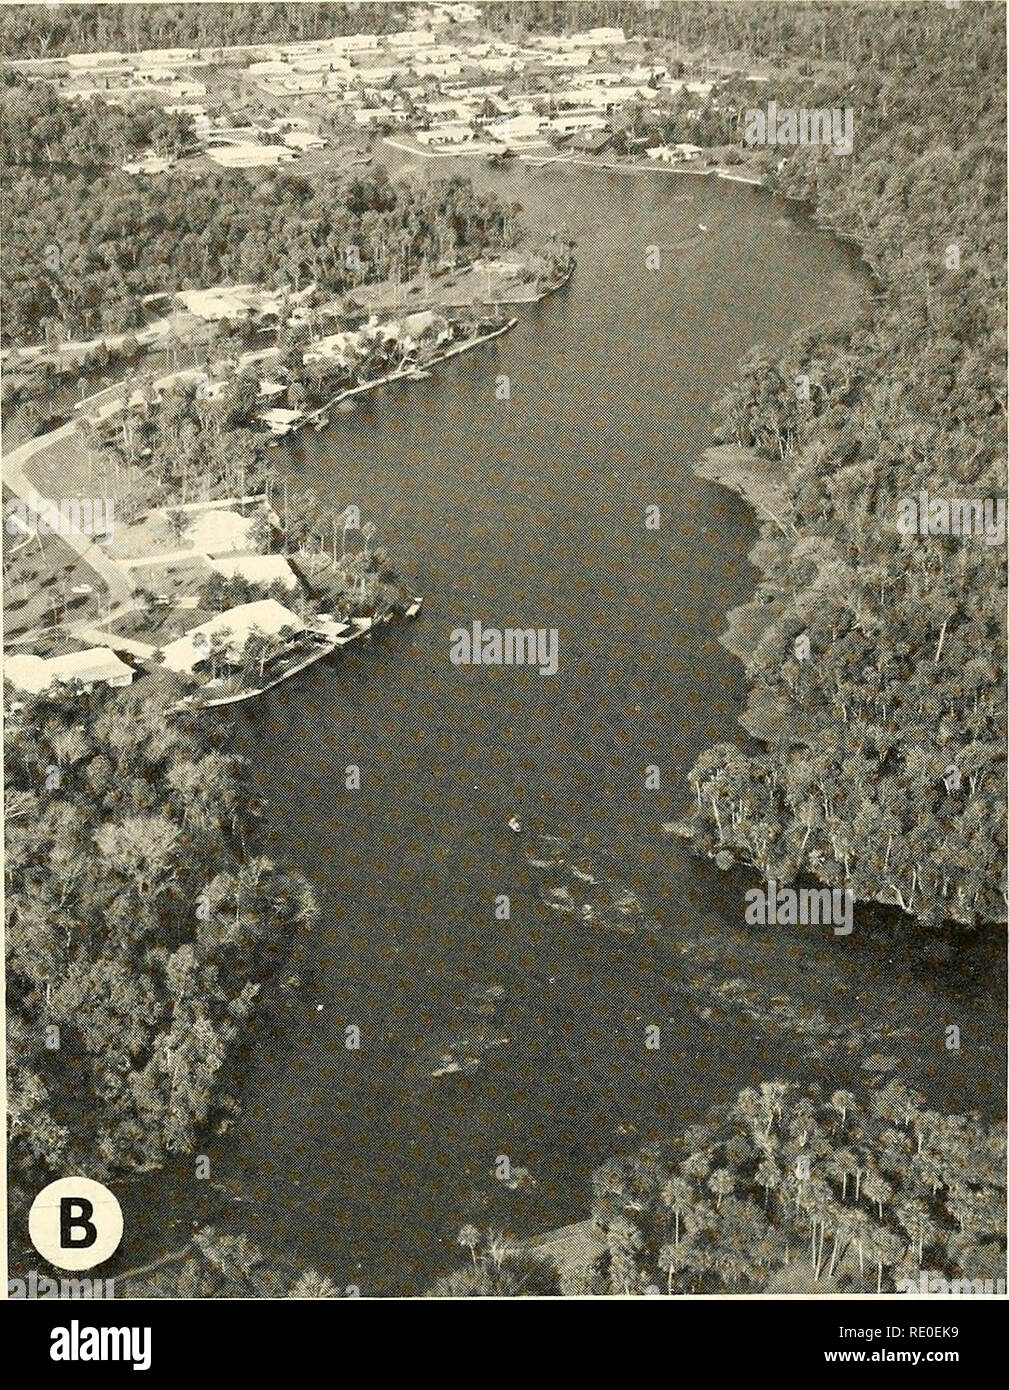 . Ecology and behavior of the Manatee (Trichechus manatus) in Florida. Manatees; Mammals. Hartman—Manatee in Florida. Fig. 2 (cont.) B, headwaters of the Homosassa River. Coastal forest is dominated by cabbage palm (Sabalpalmetto), bald cypress {Taxodiuin distichum), live oak (Quercus virginiana), red maple {Acer rubrum), red-cedar (Juniperus silicicola), magnolia {Mag- nolia virginiana), red-bay {Persea borbonia), and wax-myrtle {Myrica cerifera). Of the five major stream types in Florida recognized by Beck (1965), spring-fed rivers such as the Crystal, Homosassa, and Chas- sahowitzka are cla Stock Photo